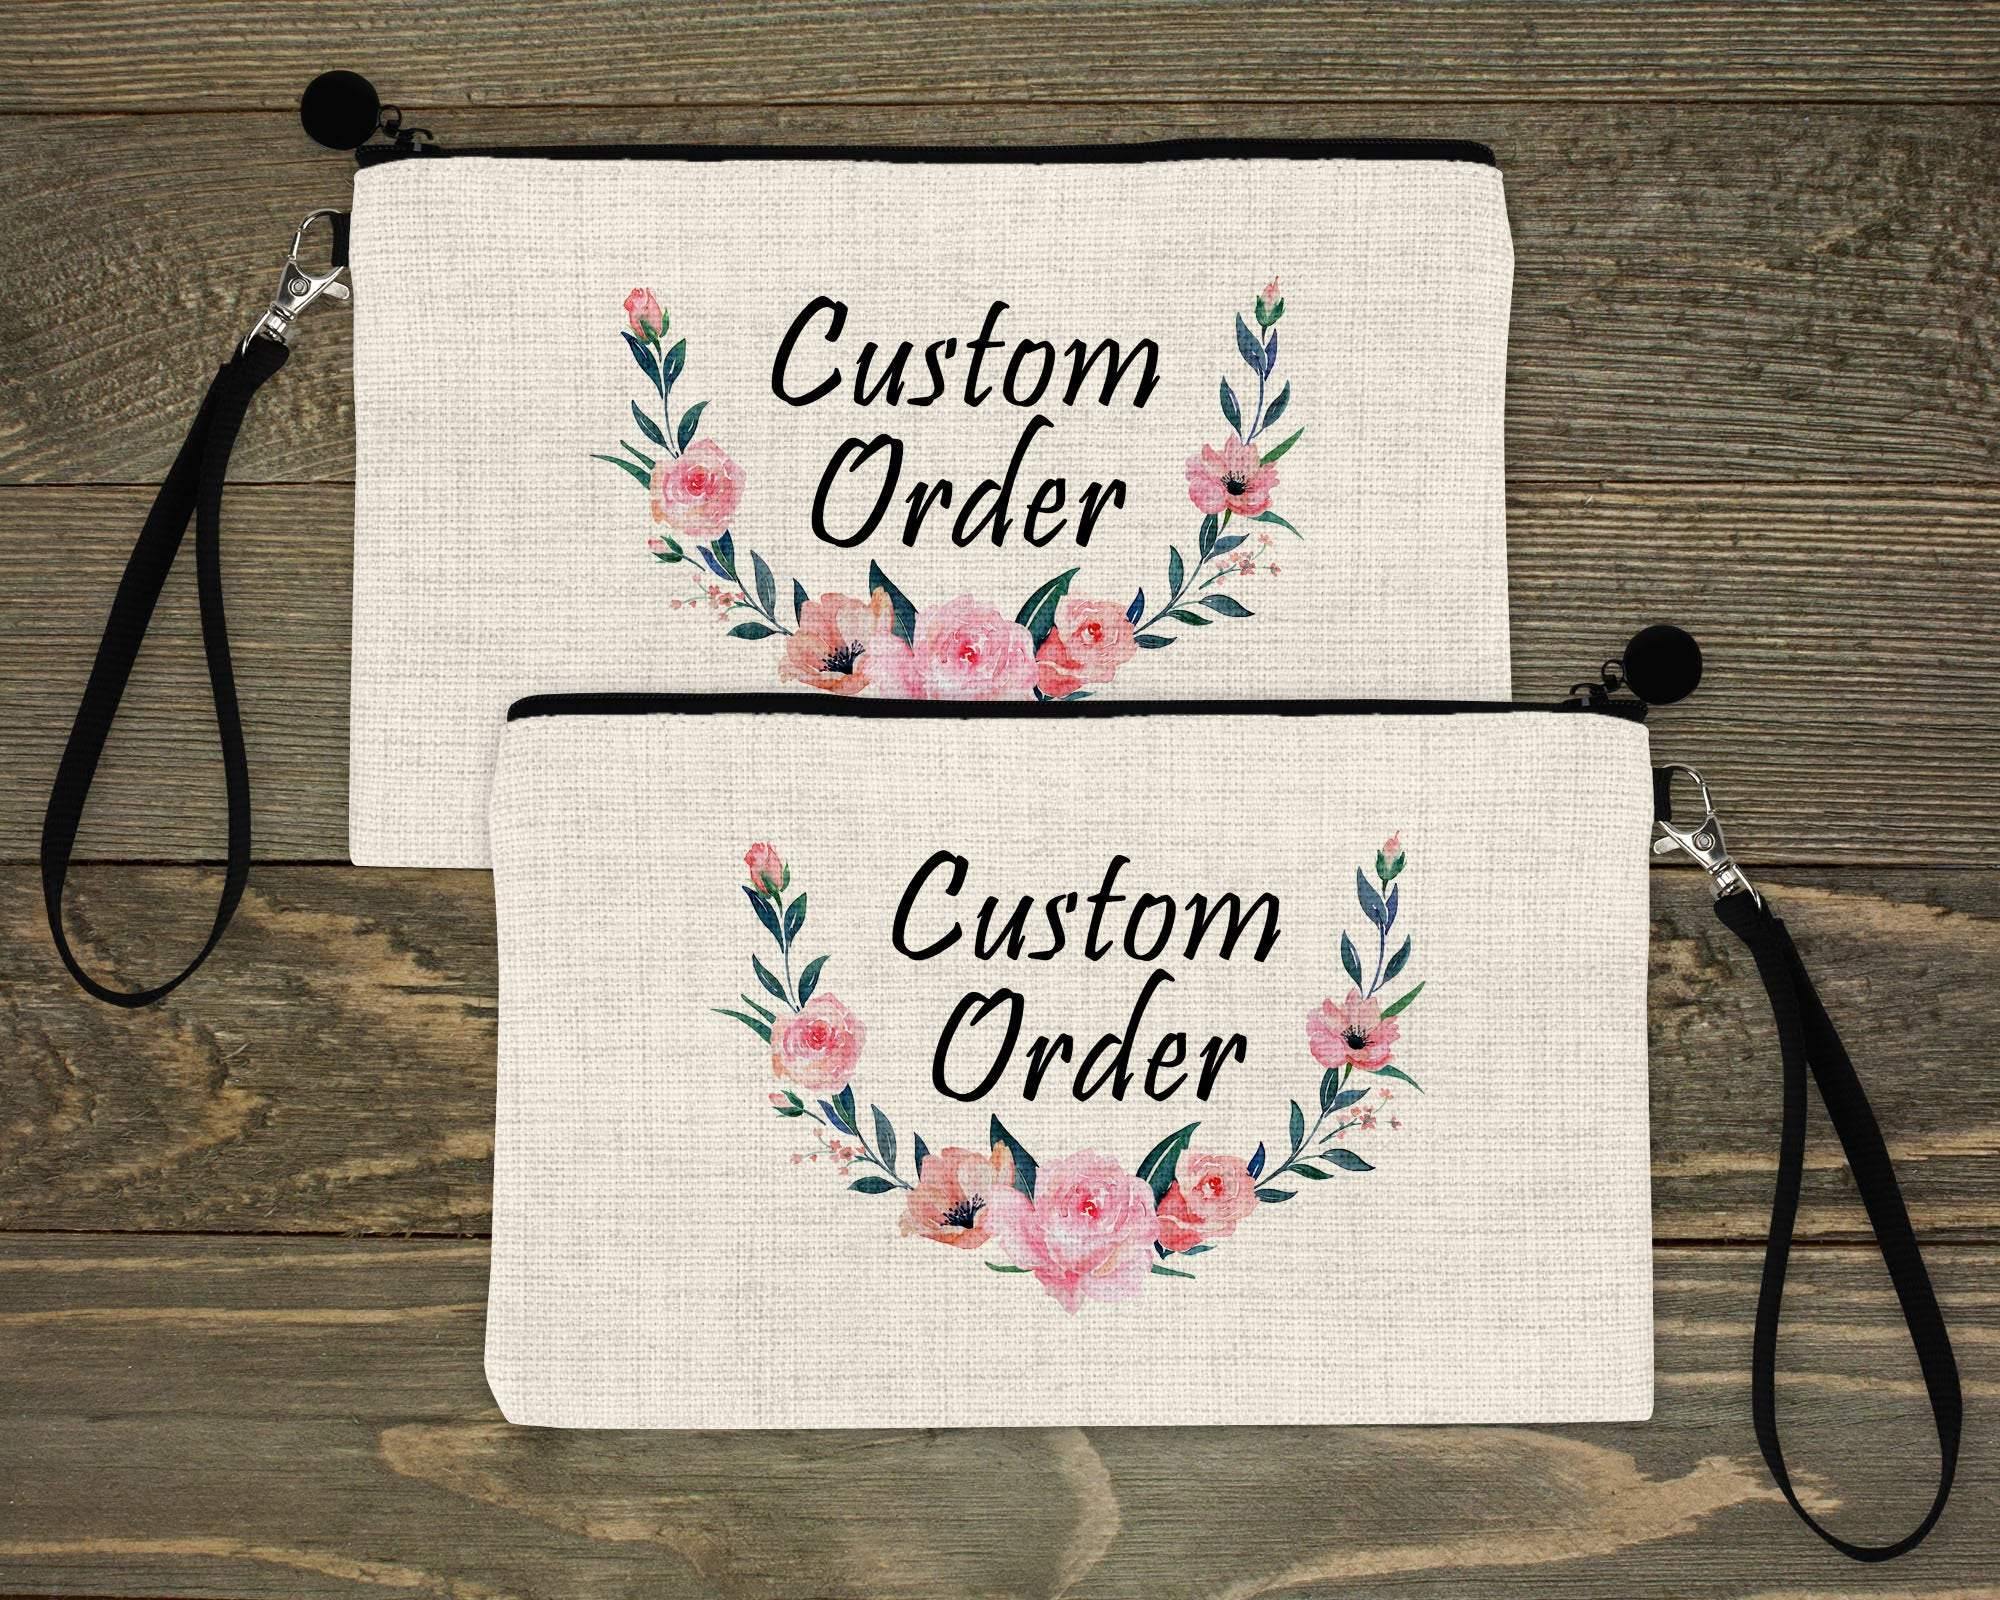 Personalized Cosmetic Bags | Custom Cosmetic Bags | Custom Order - This & That Solutions - Personalized Cosmetic Bags | Custom Cosmetic Bags | Custom Order - Personalized Gifts & Custom Home Decor